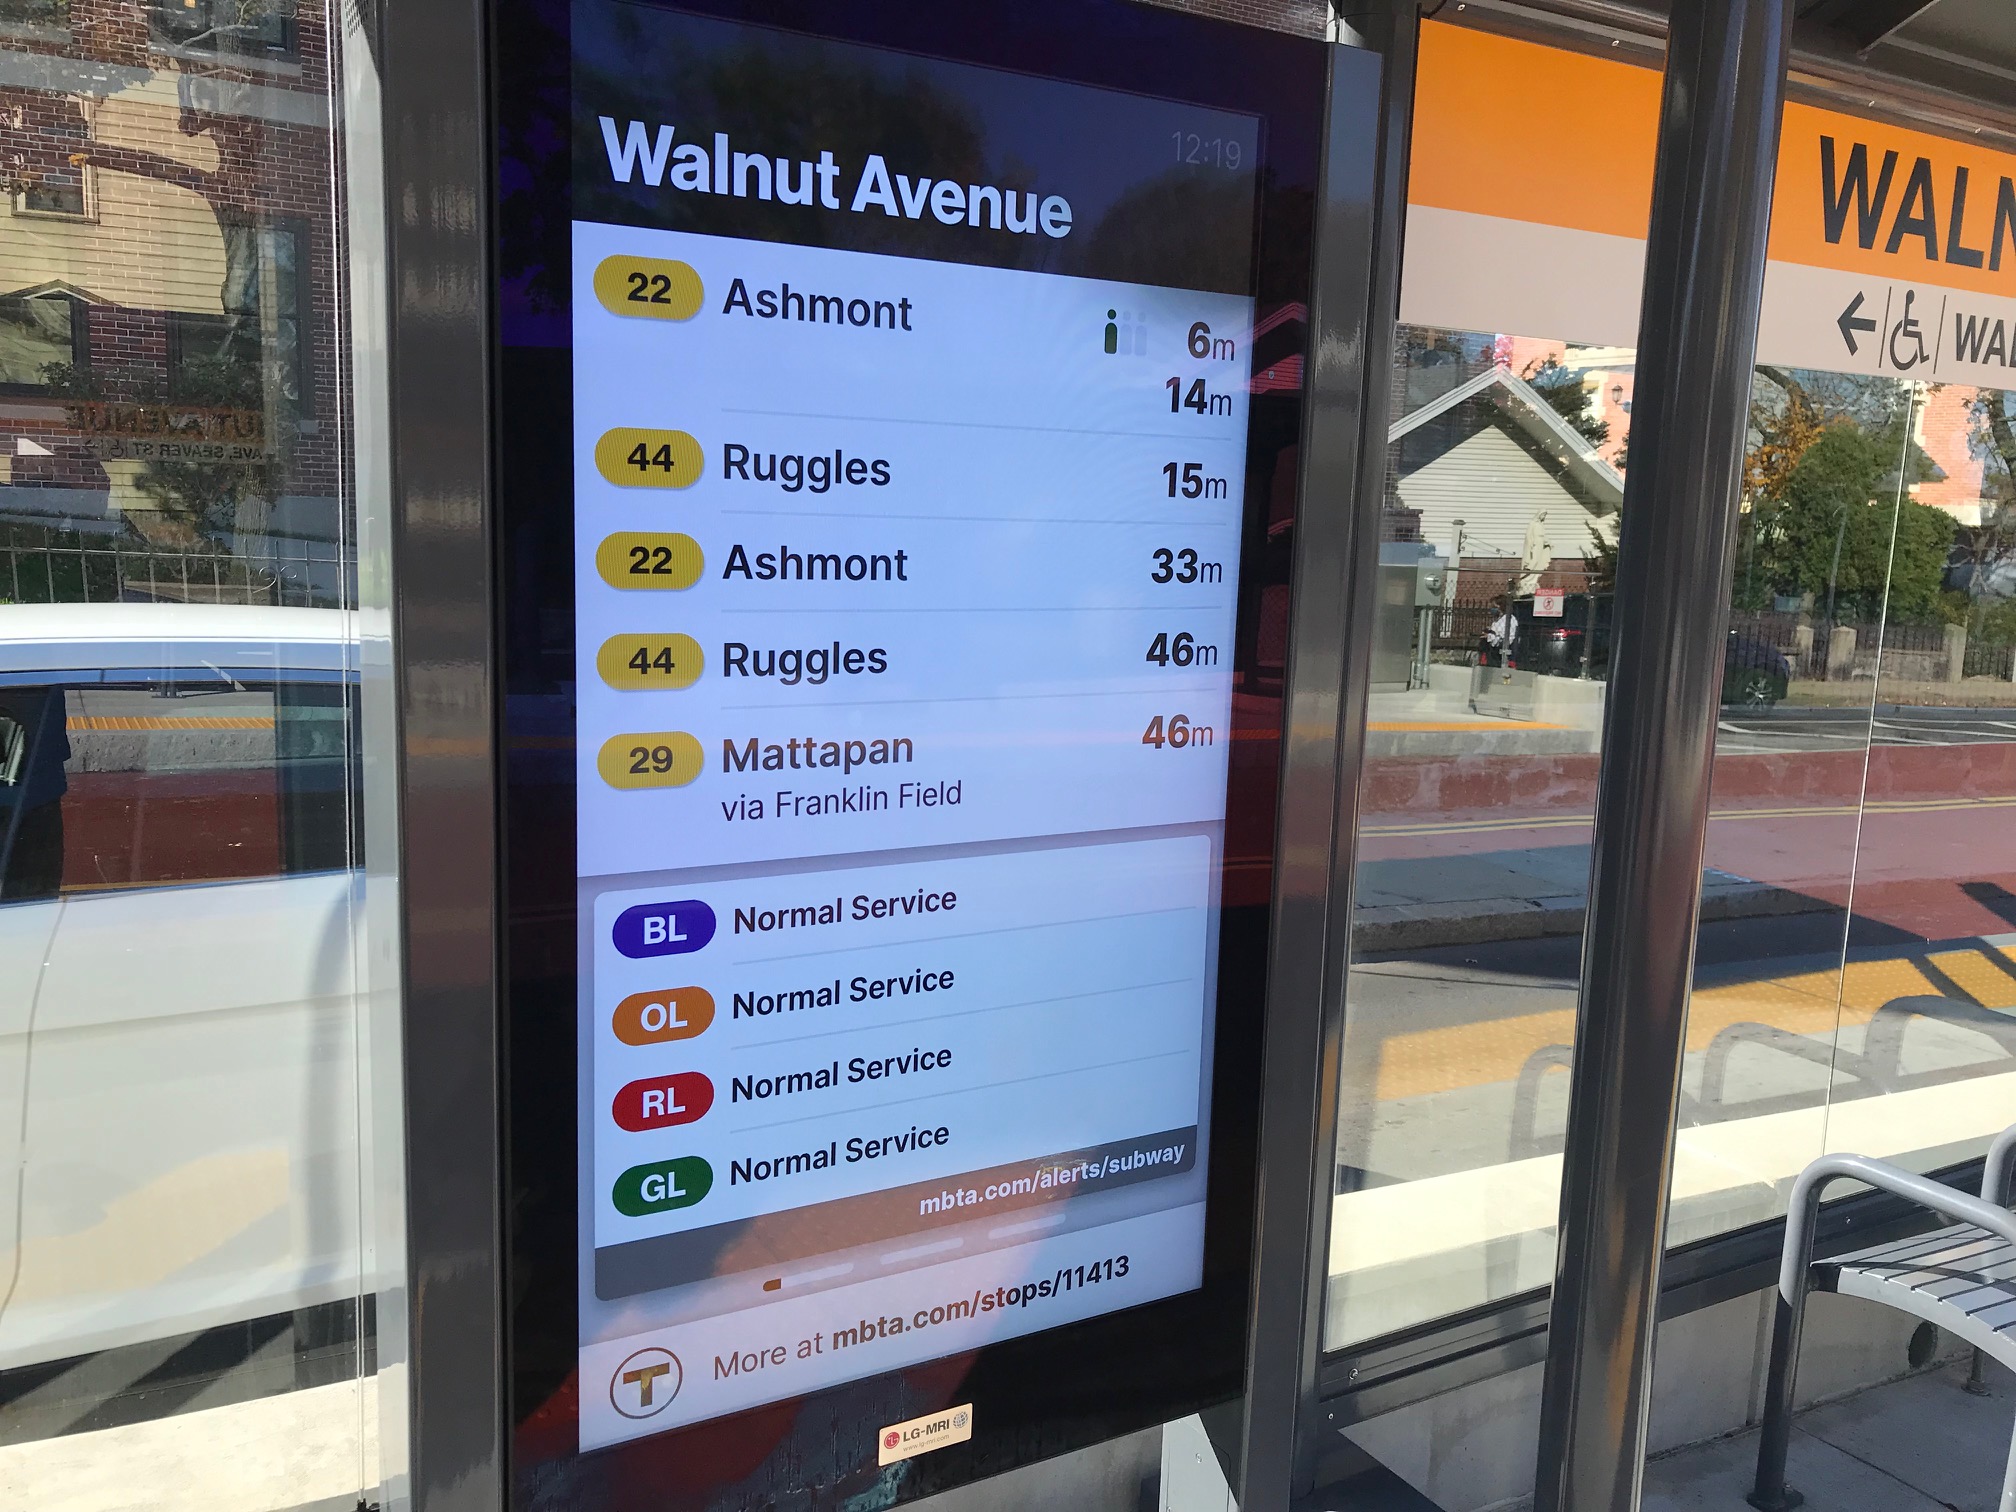 Large transit information screens at new bus stops along the Columbus Ave. bus lanes include arrival times for upcoming buses, crowding information, and other rider alerts. The units also include speakers that announce arrival information at regular intervals for visually-impaired riders.